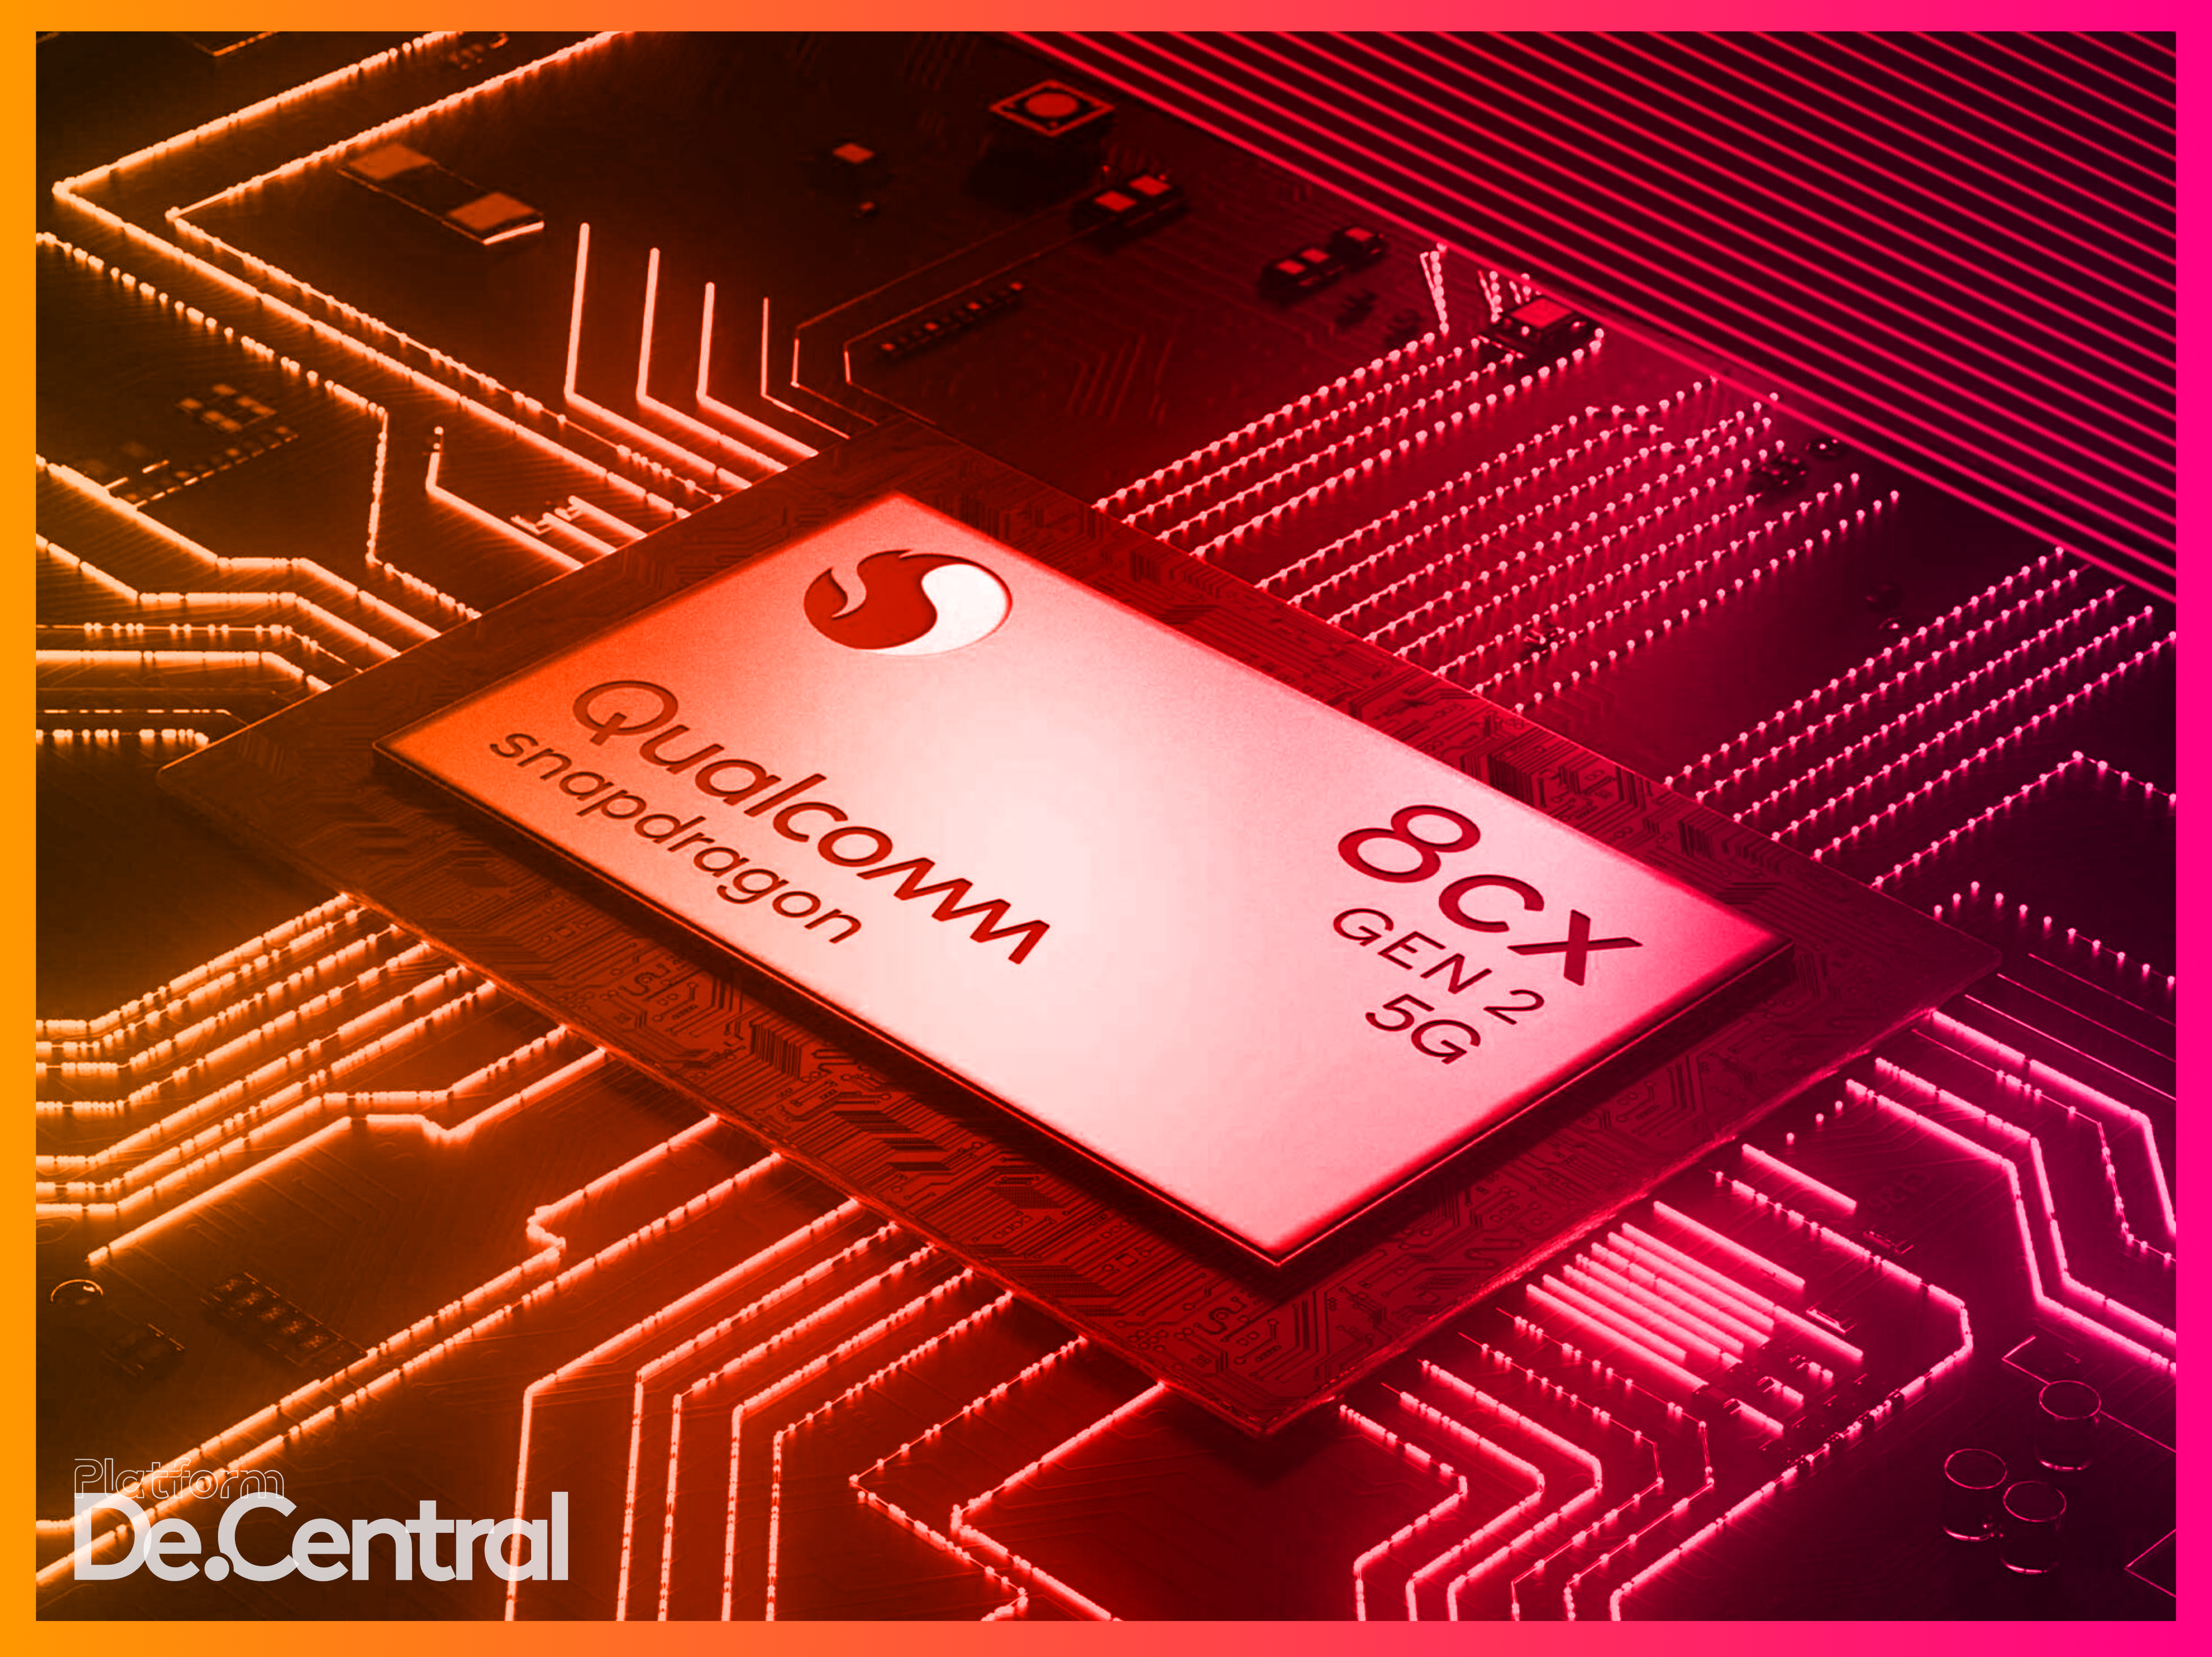 ARMs Race | Qualcomm Snapdragon 8cx Gen 2 5G announced and more evidence of Microsoft’s SQ2 processor